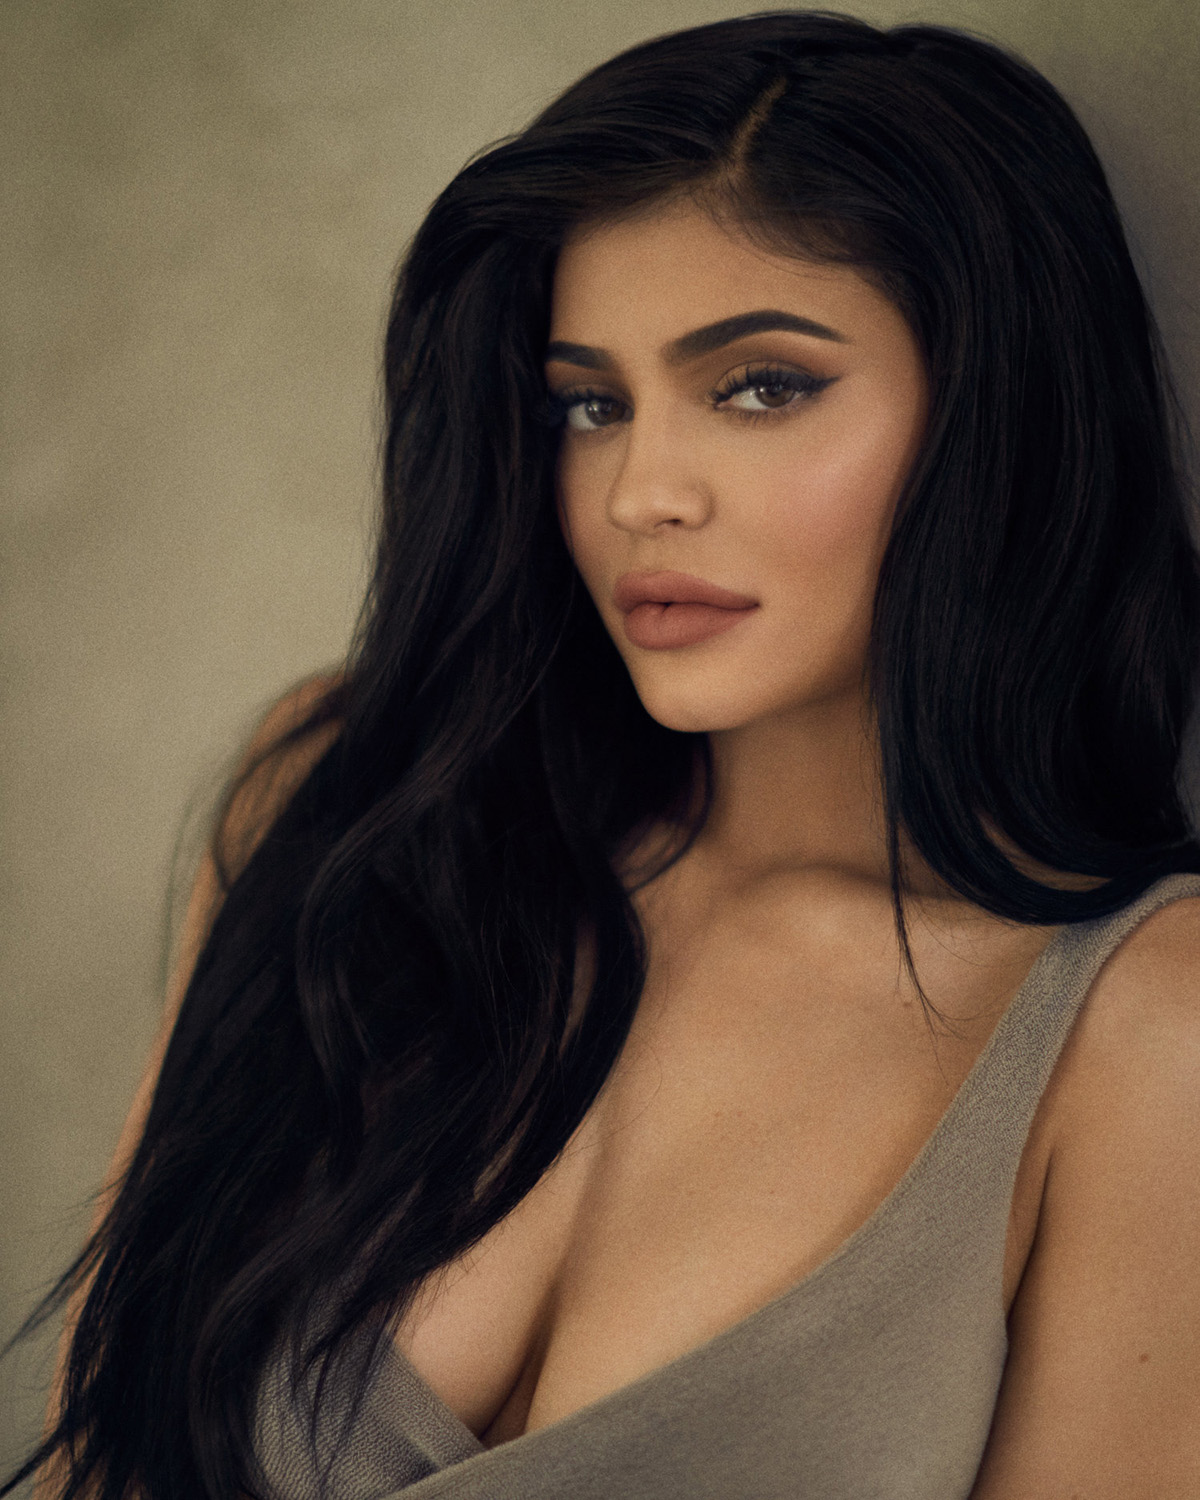 'Nude Pics' with Kylie Jenner via Mr Skin - Pic #20